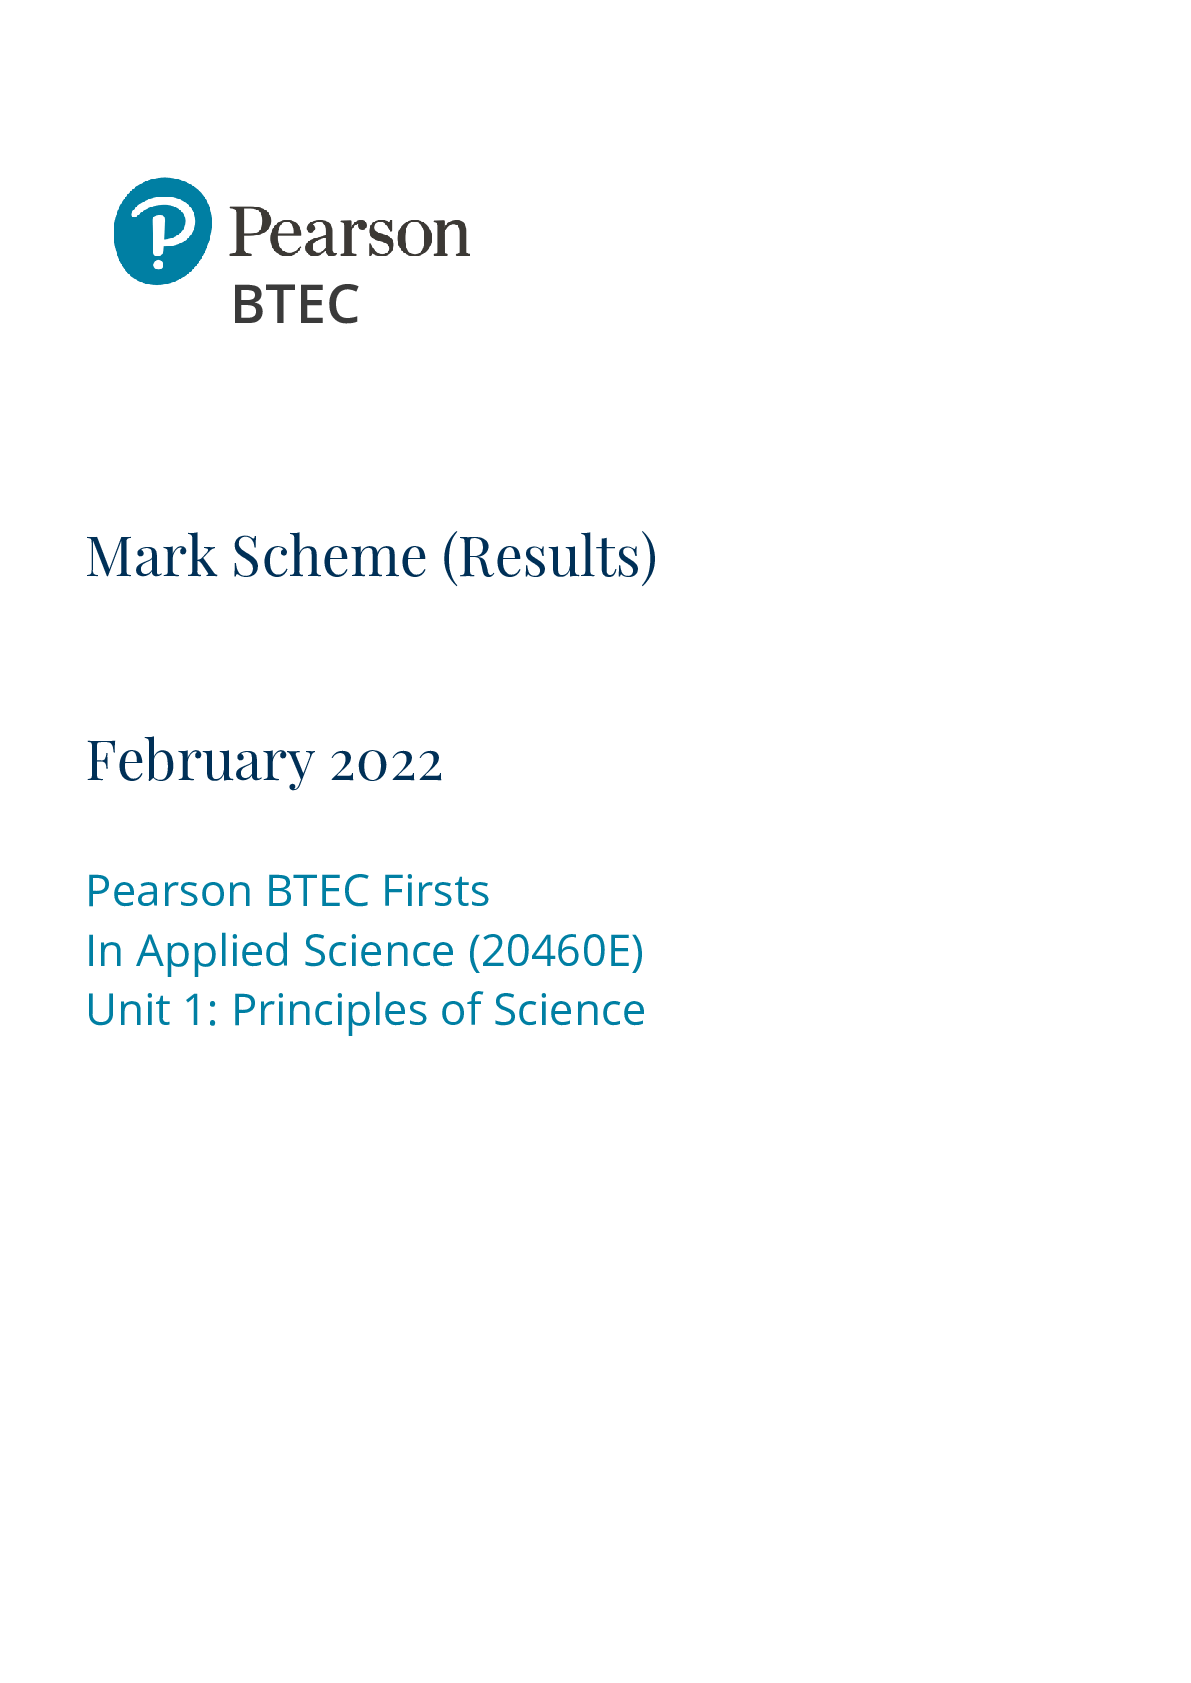 Pearson BTEC Firsts In Applied Science (20460E) Unit 1 Principles of